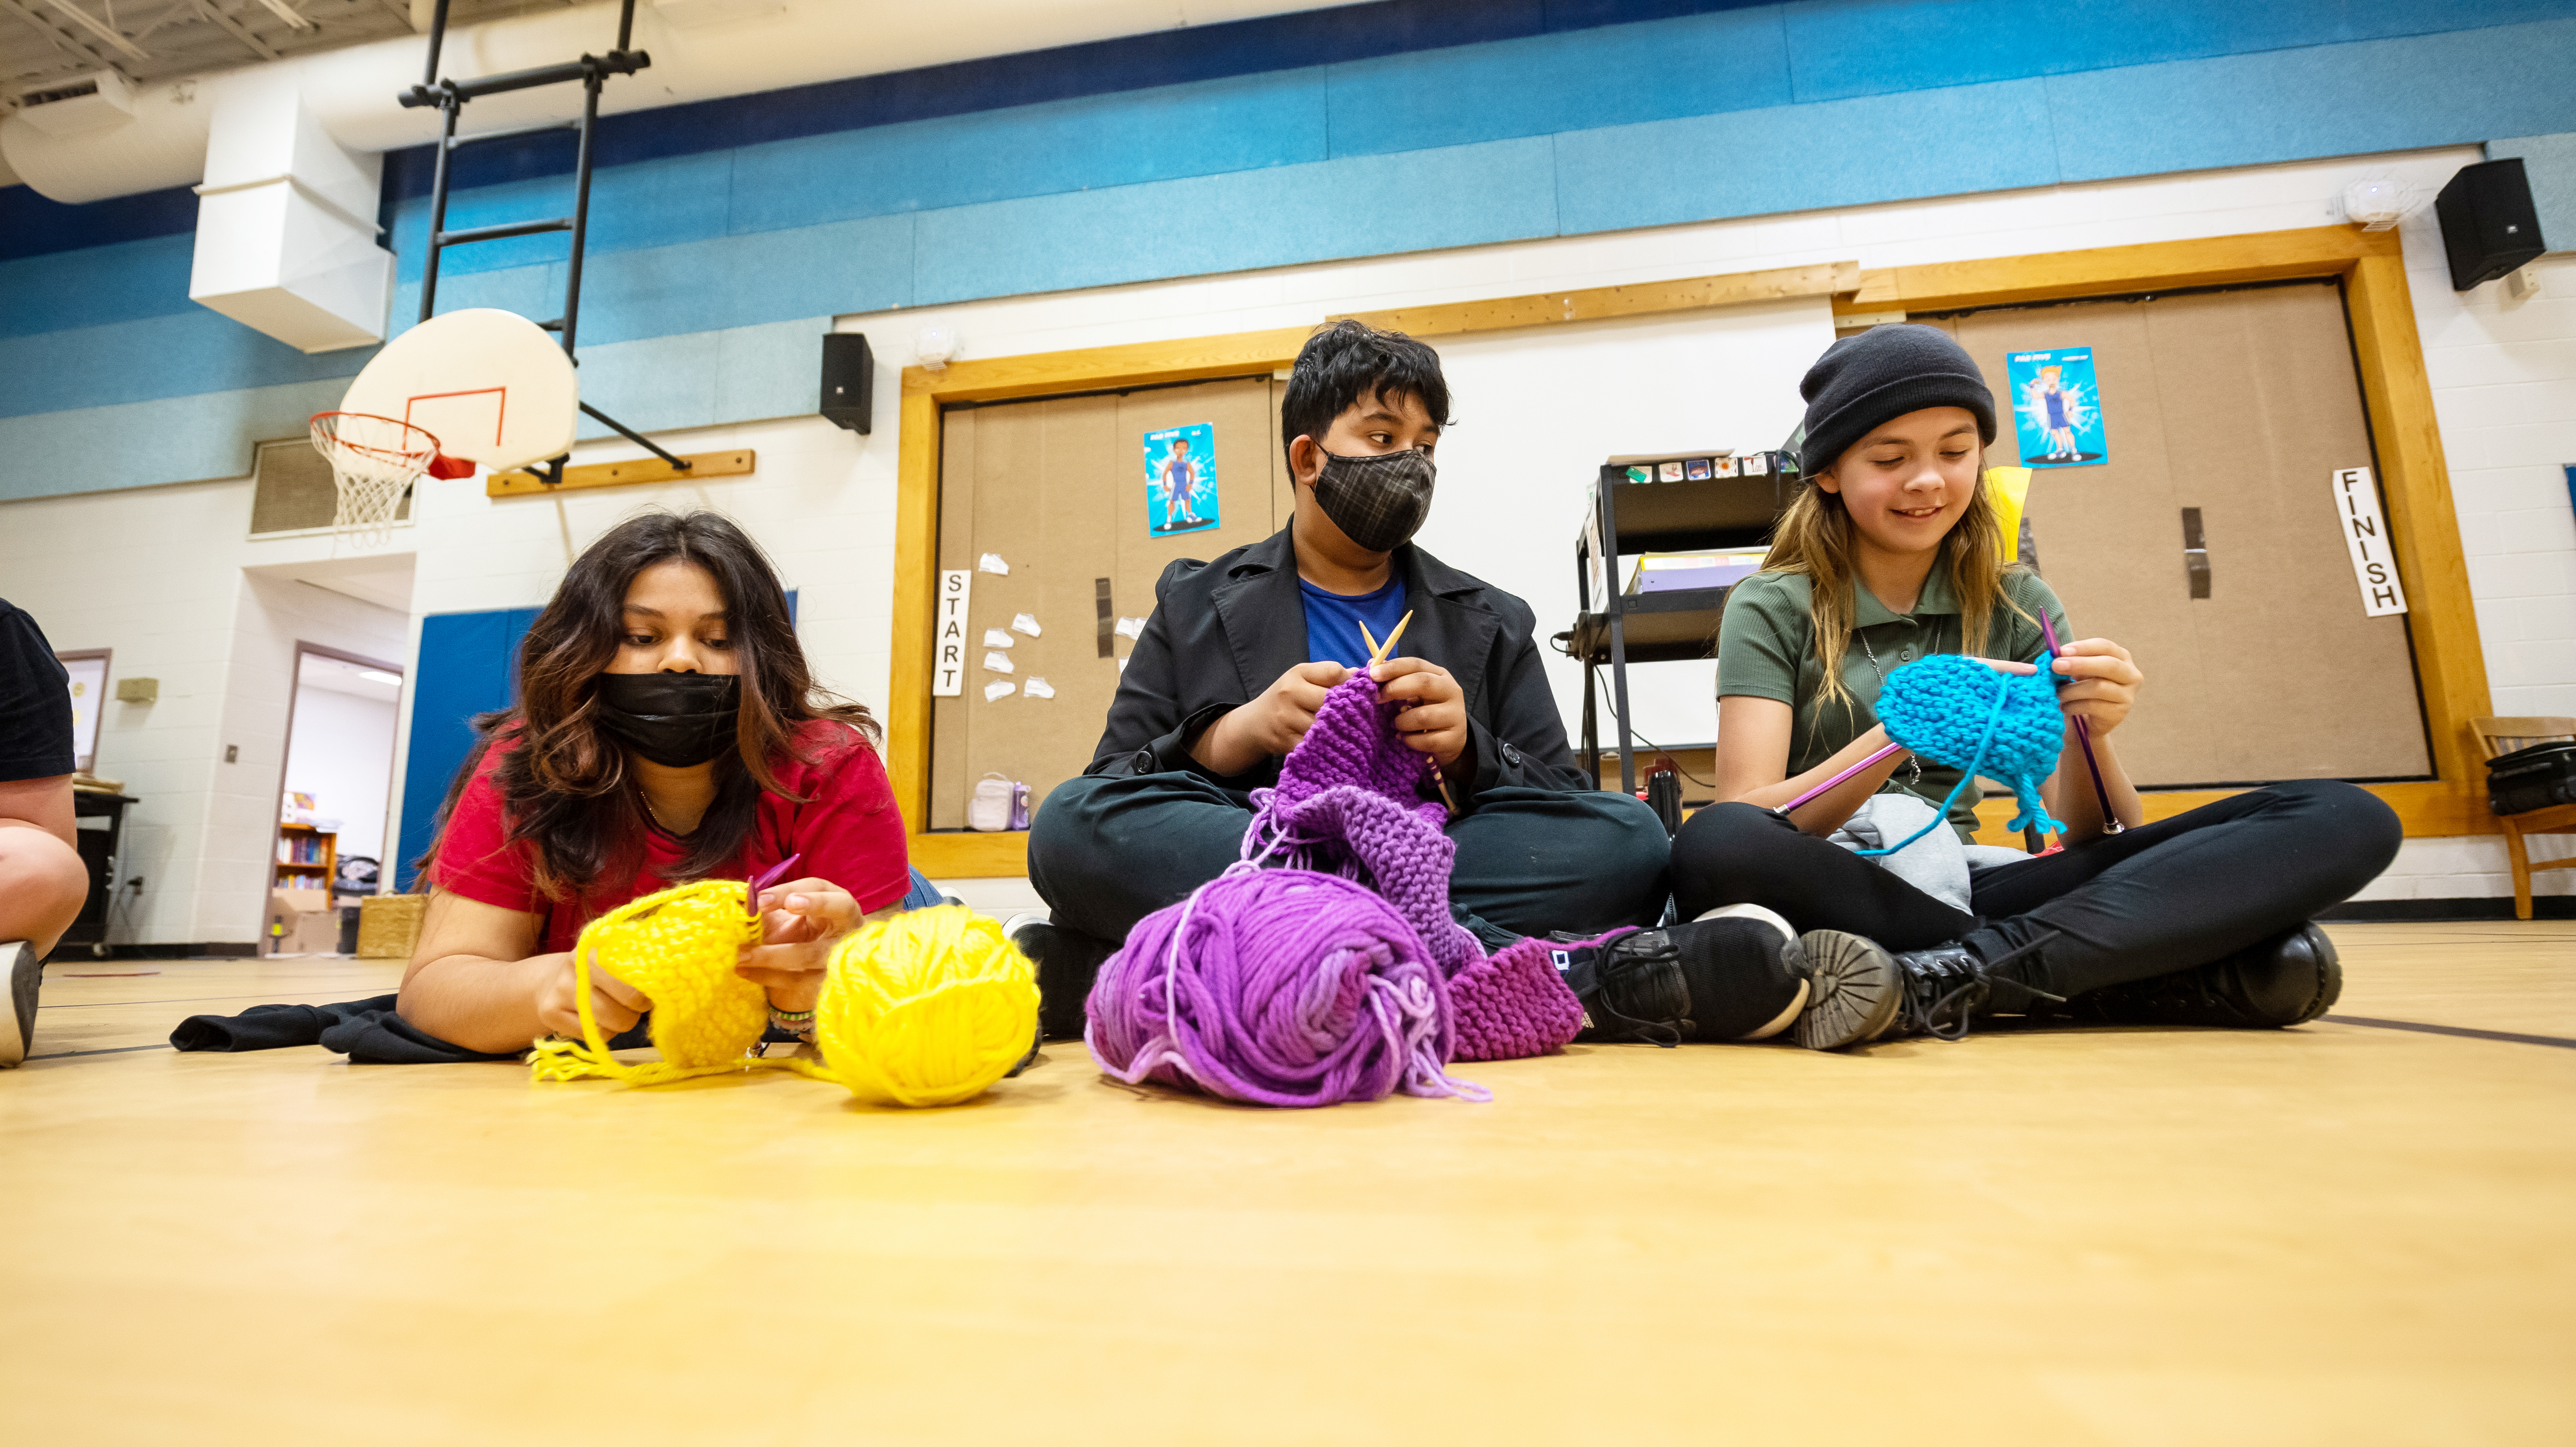 Sixth-graders at Little Run Elementary School meet to knit during their lunch period.